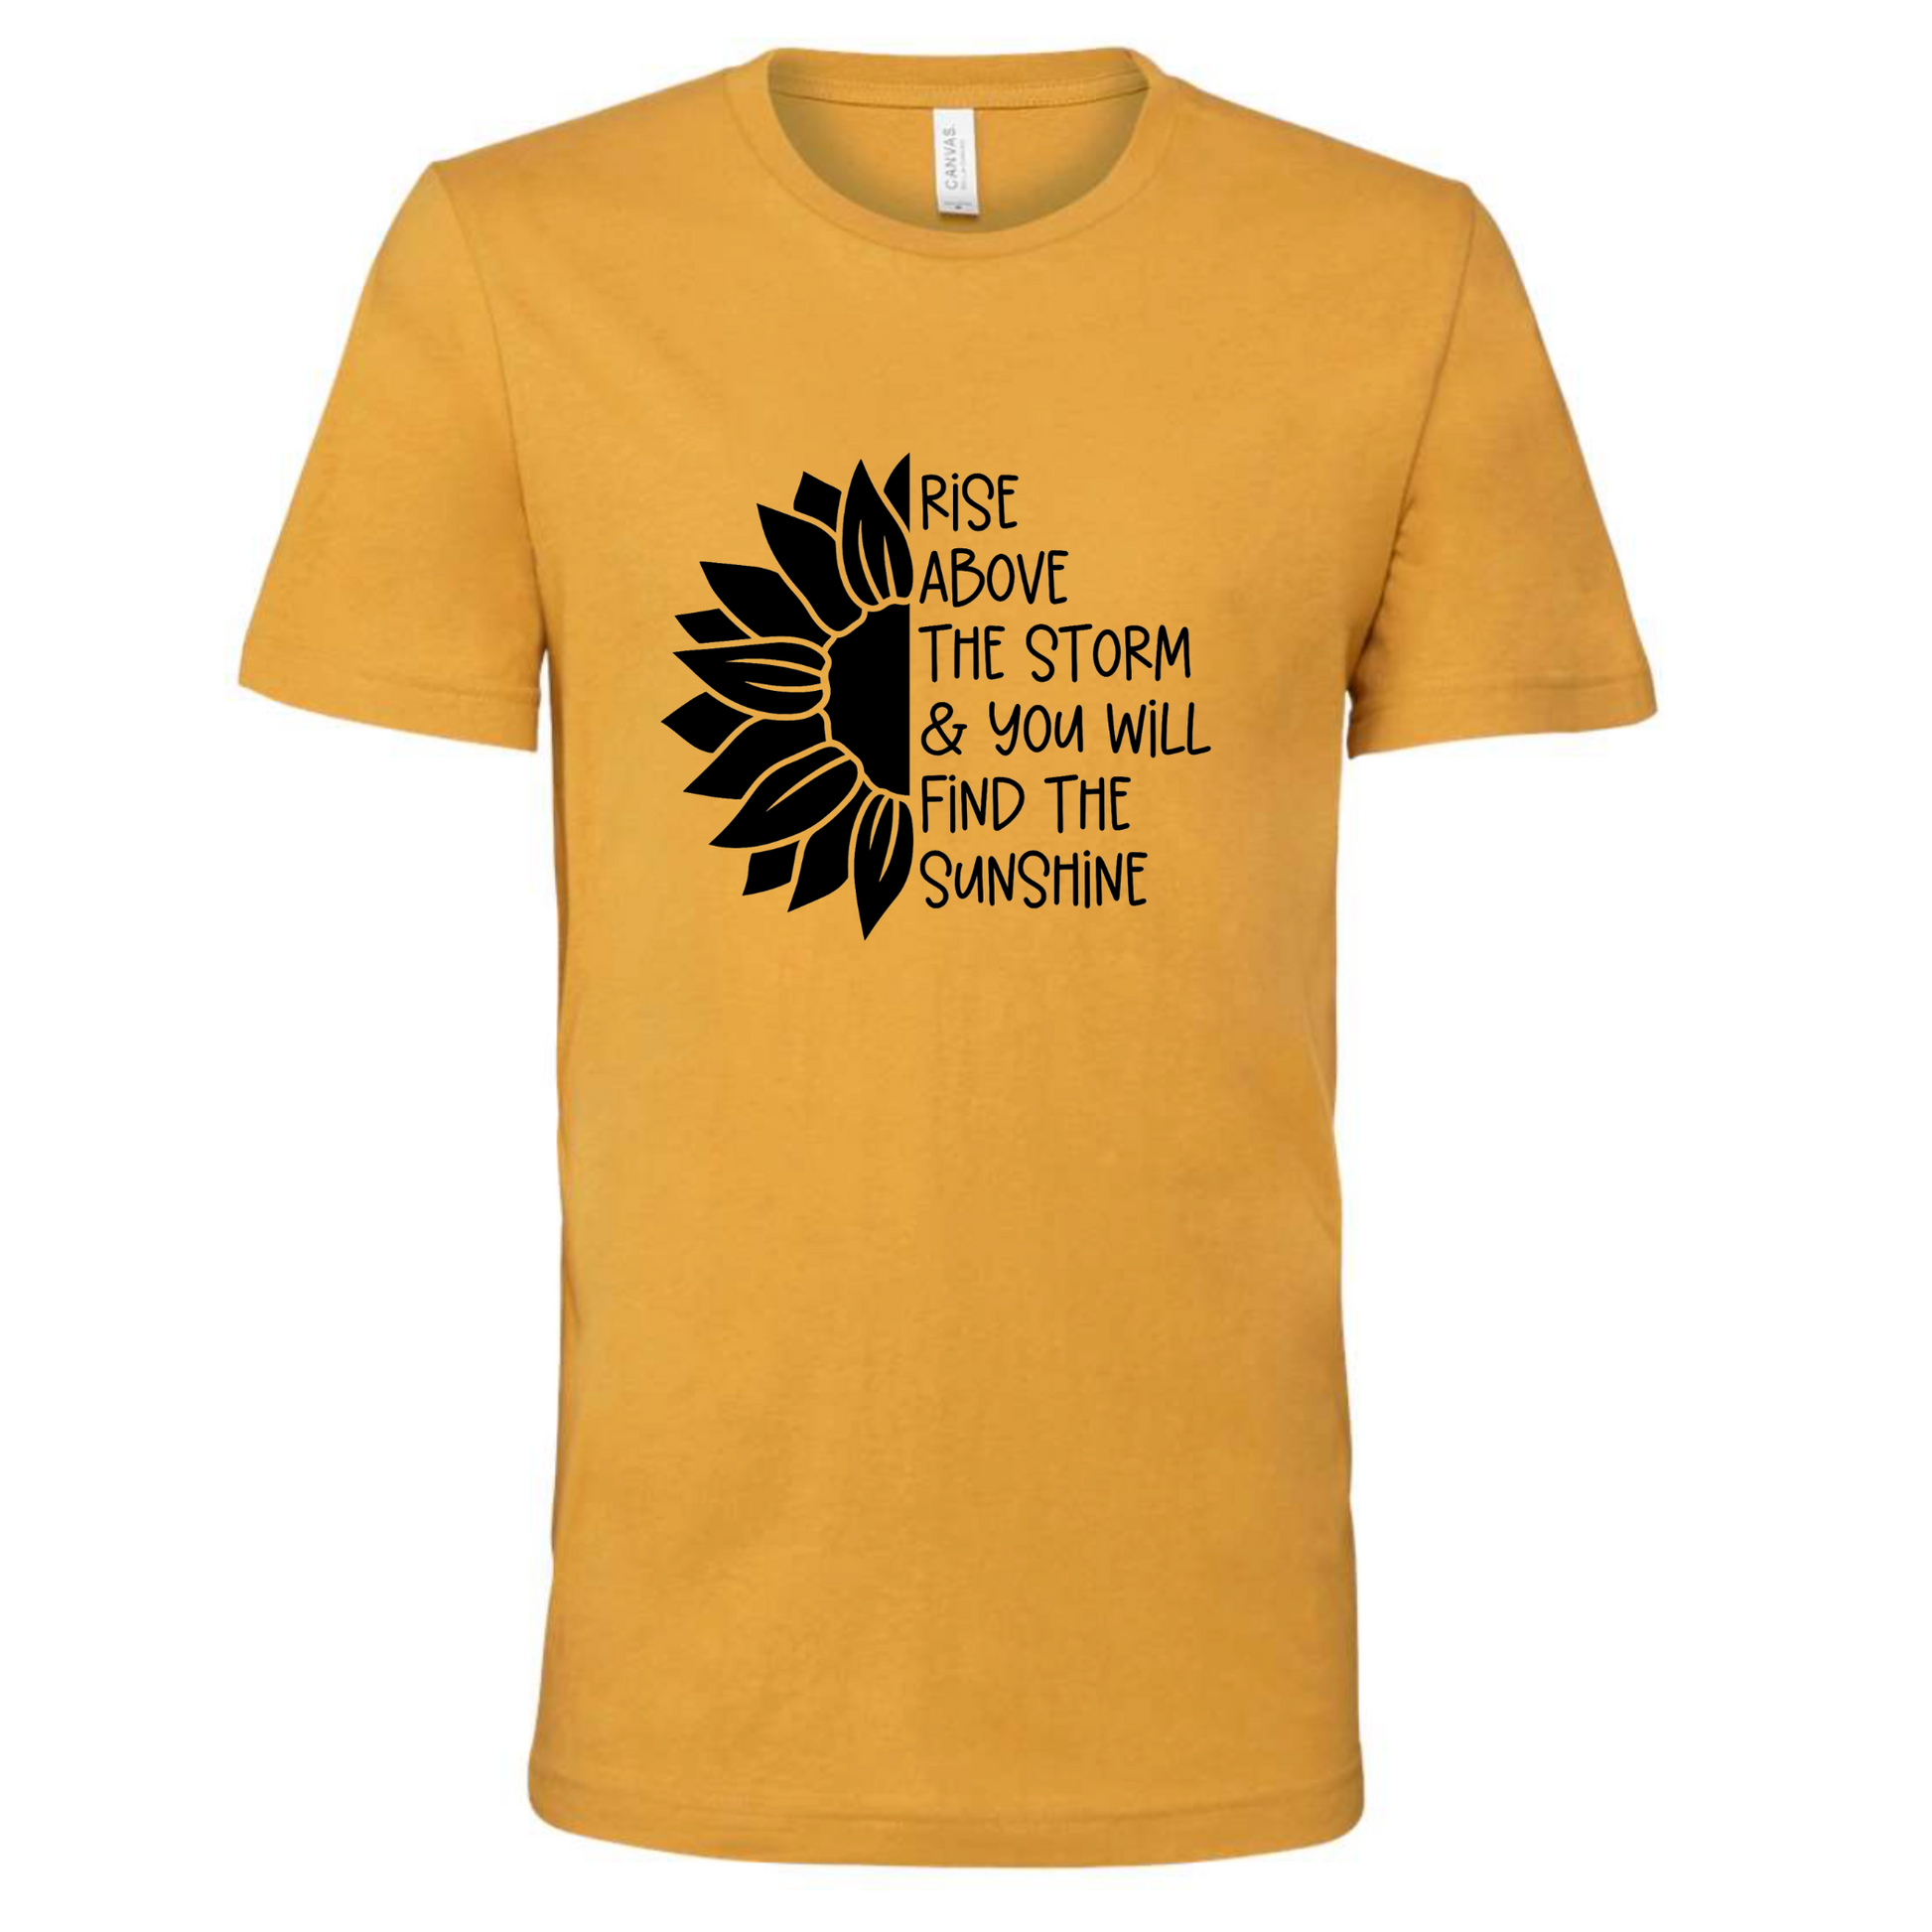 Rise Above The Storm Sunflower T-Shirt. The front has a half of a black sunflower on the left, with the right half having a quote of "rise above the storm and you will find the sunshine". This is a black design on a yellow shirt. This is the front view of the shirt.